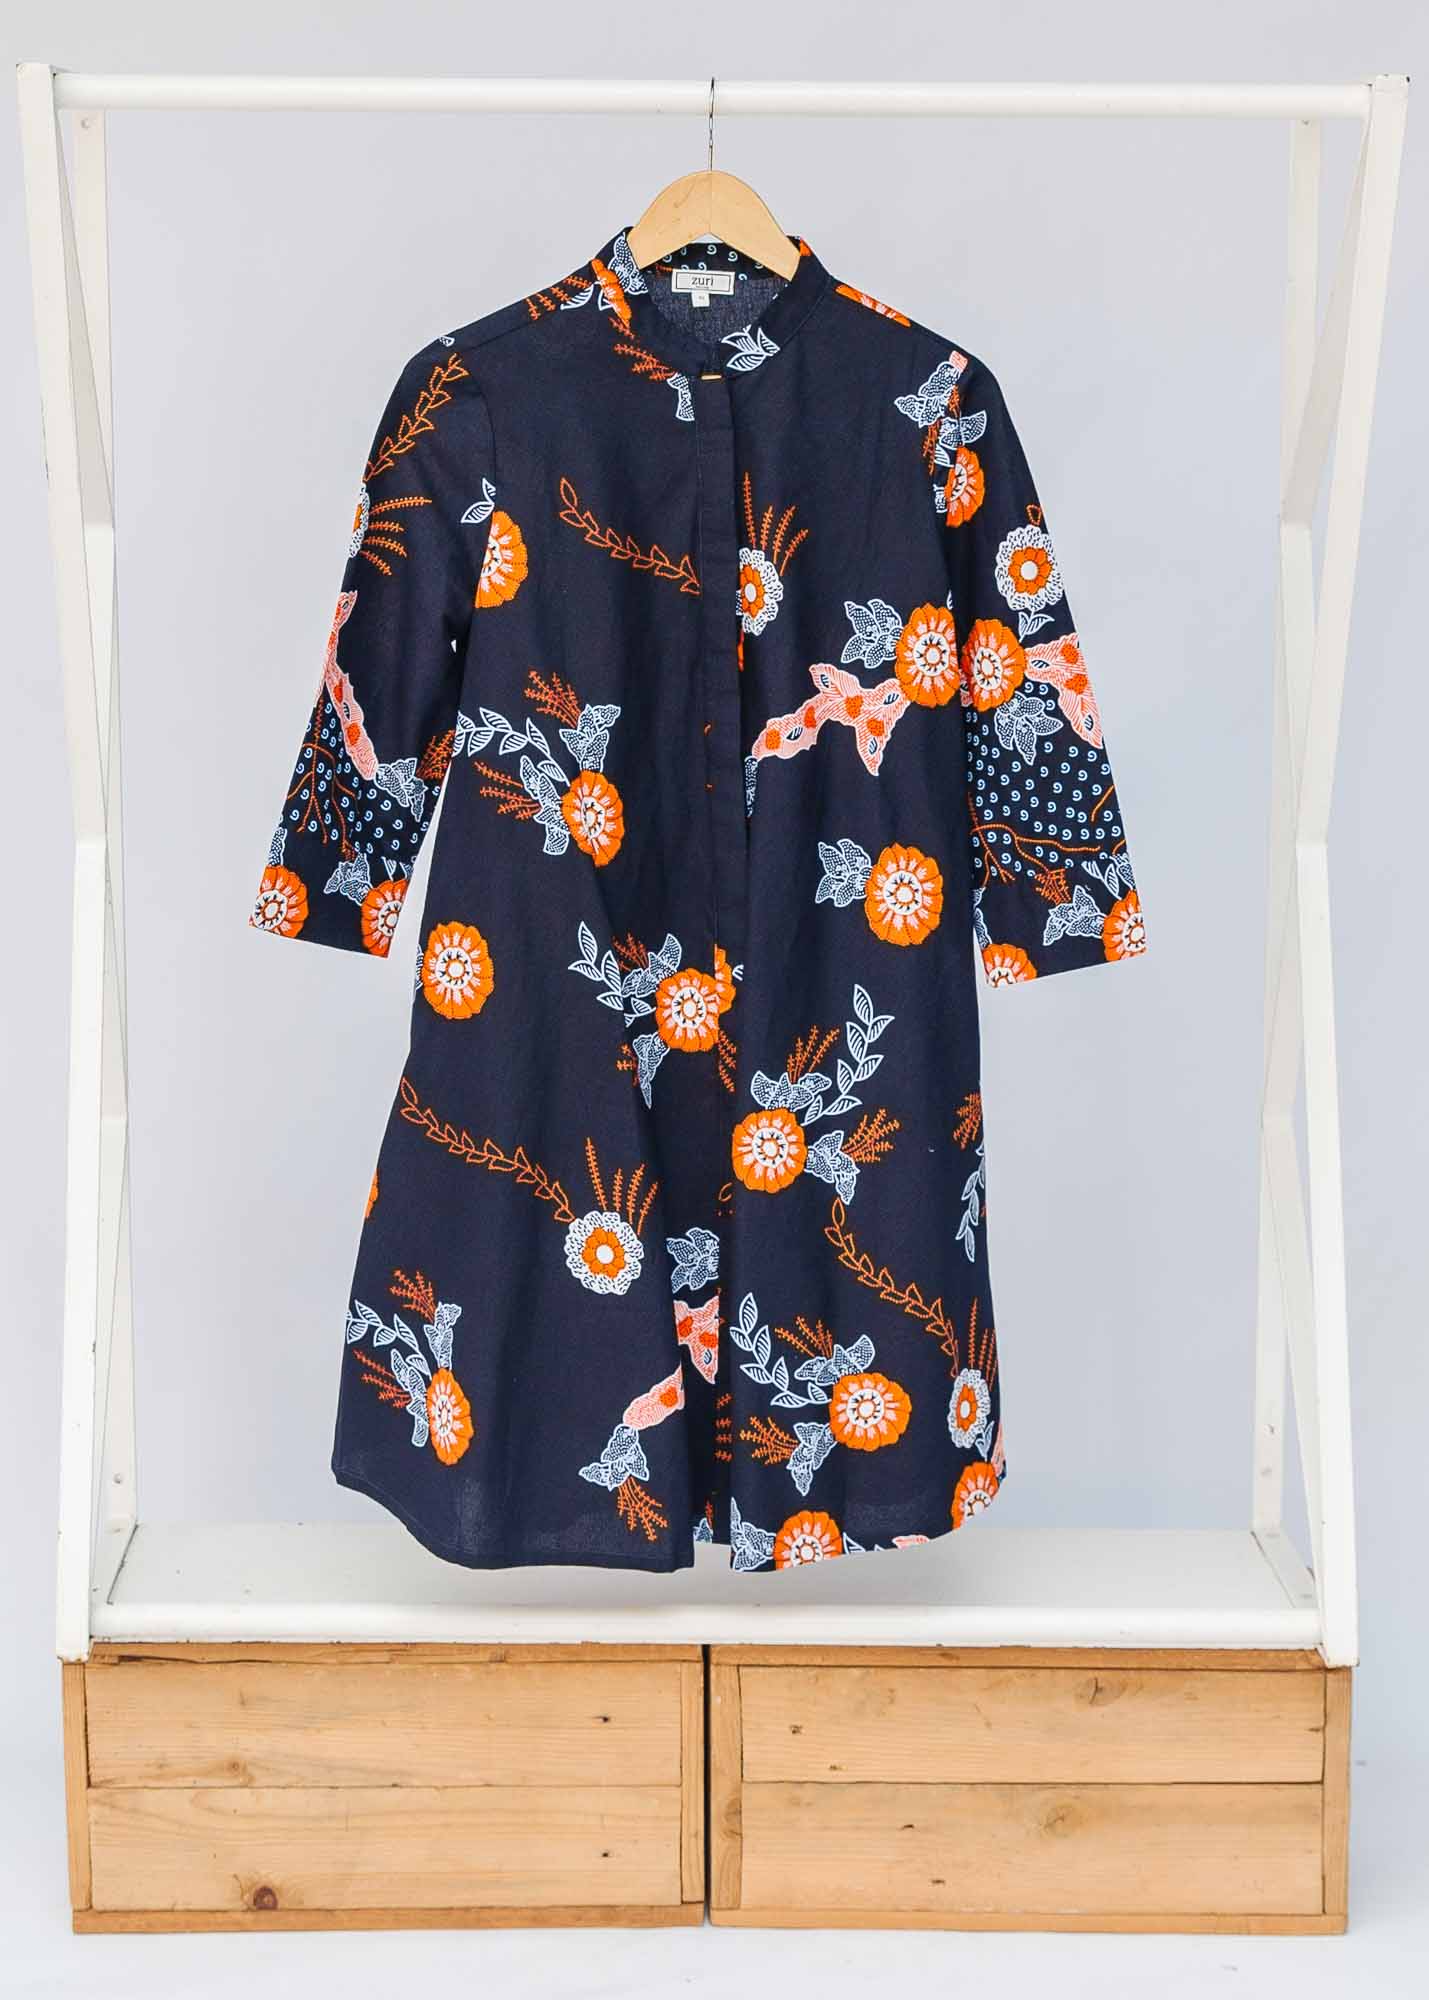 Display of black dress with orange, white and brown floral print